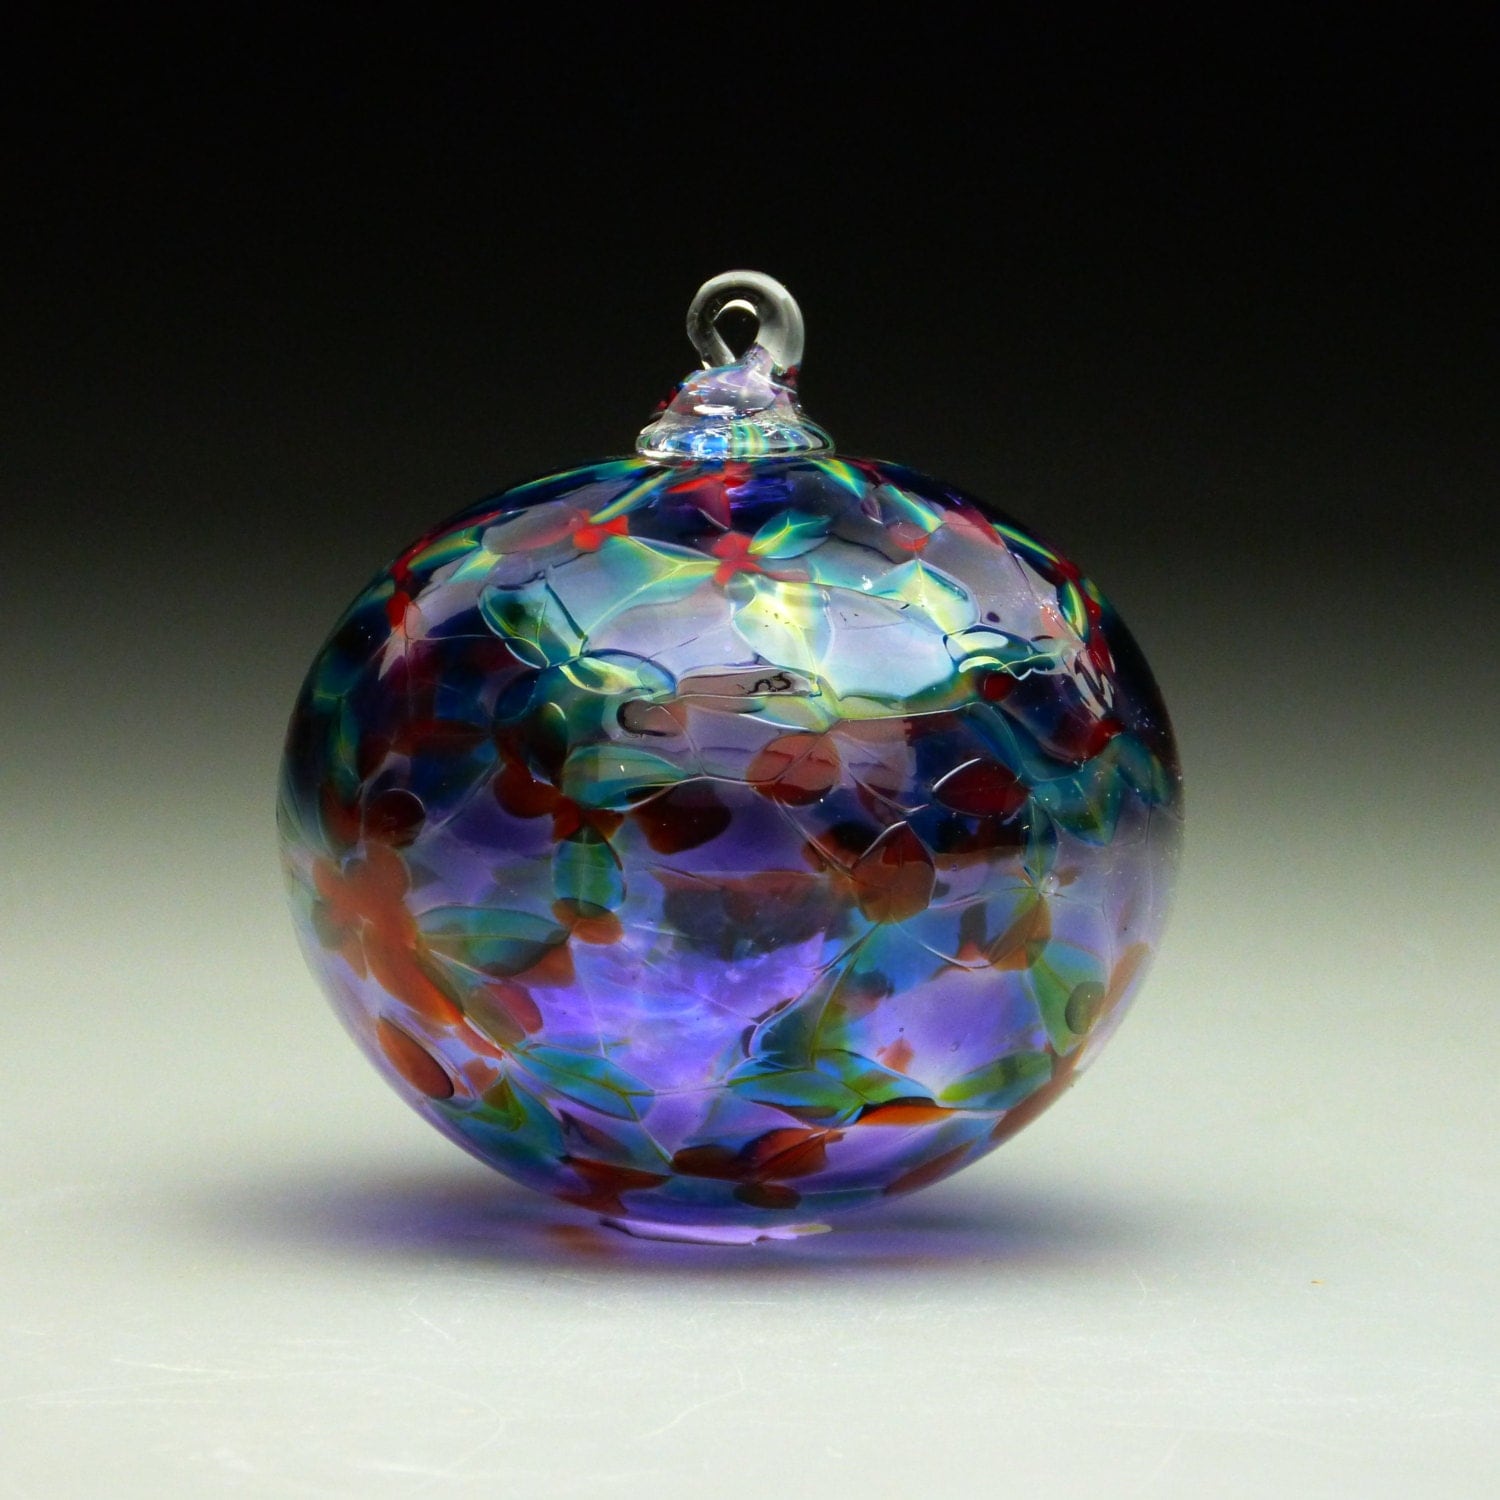 Hand Made Blown Glass Christmas Ornament In Tones Of Purple